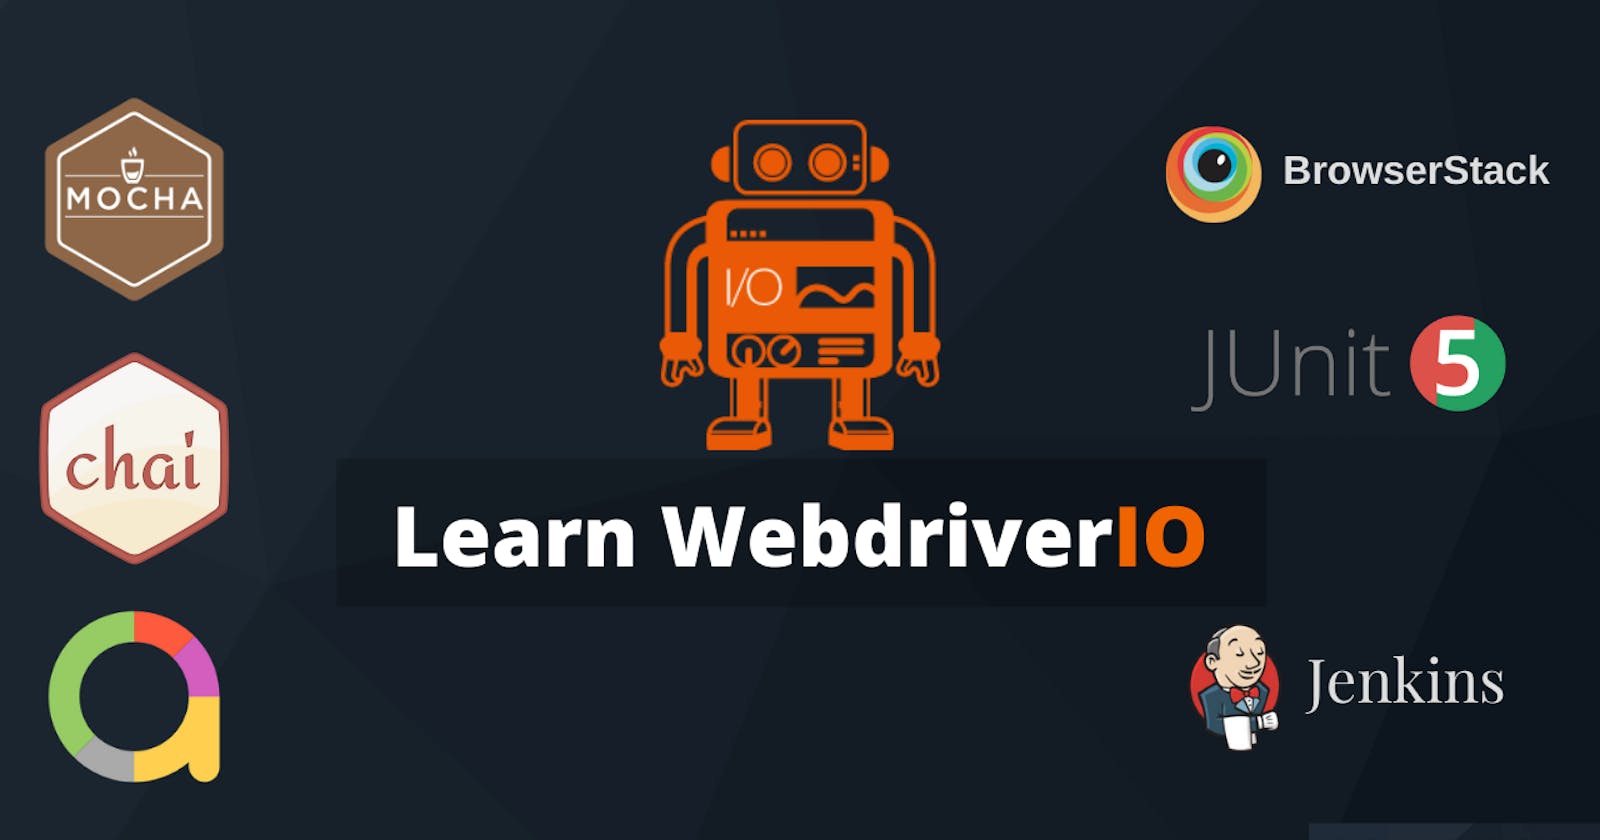 WebdriverIO Tutorial for Beginners